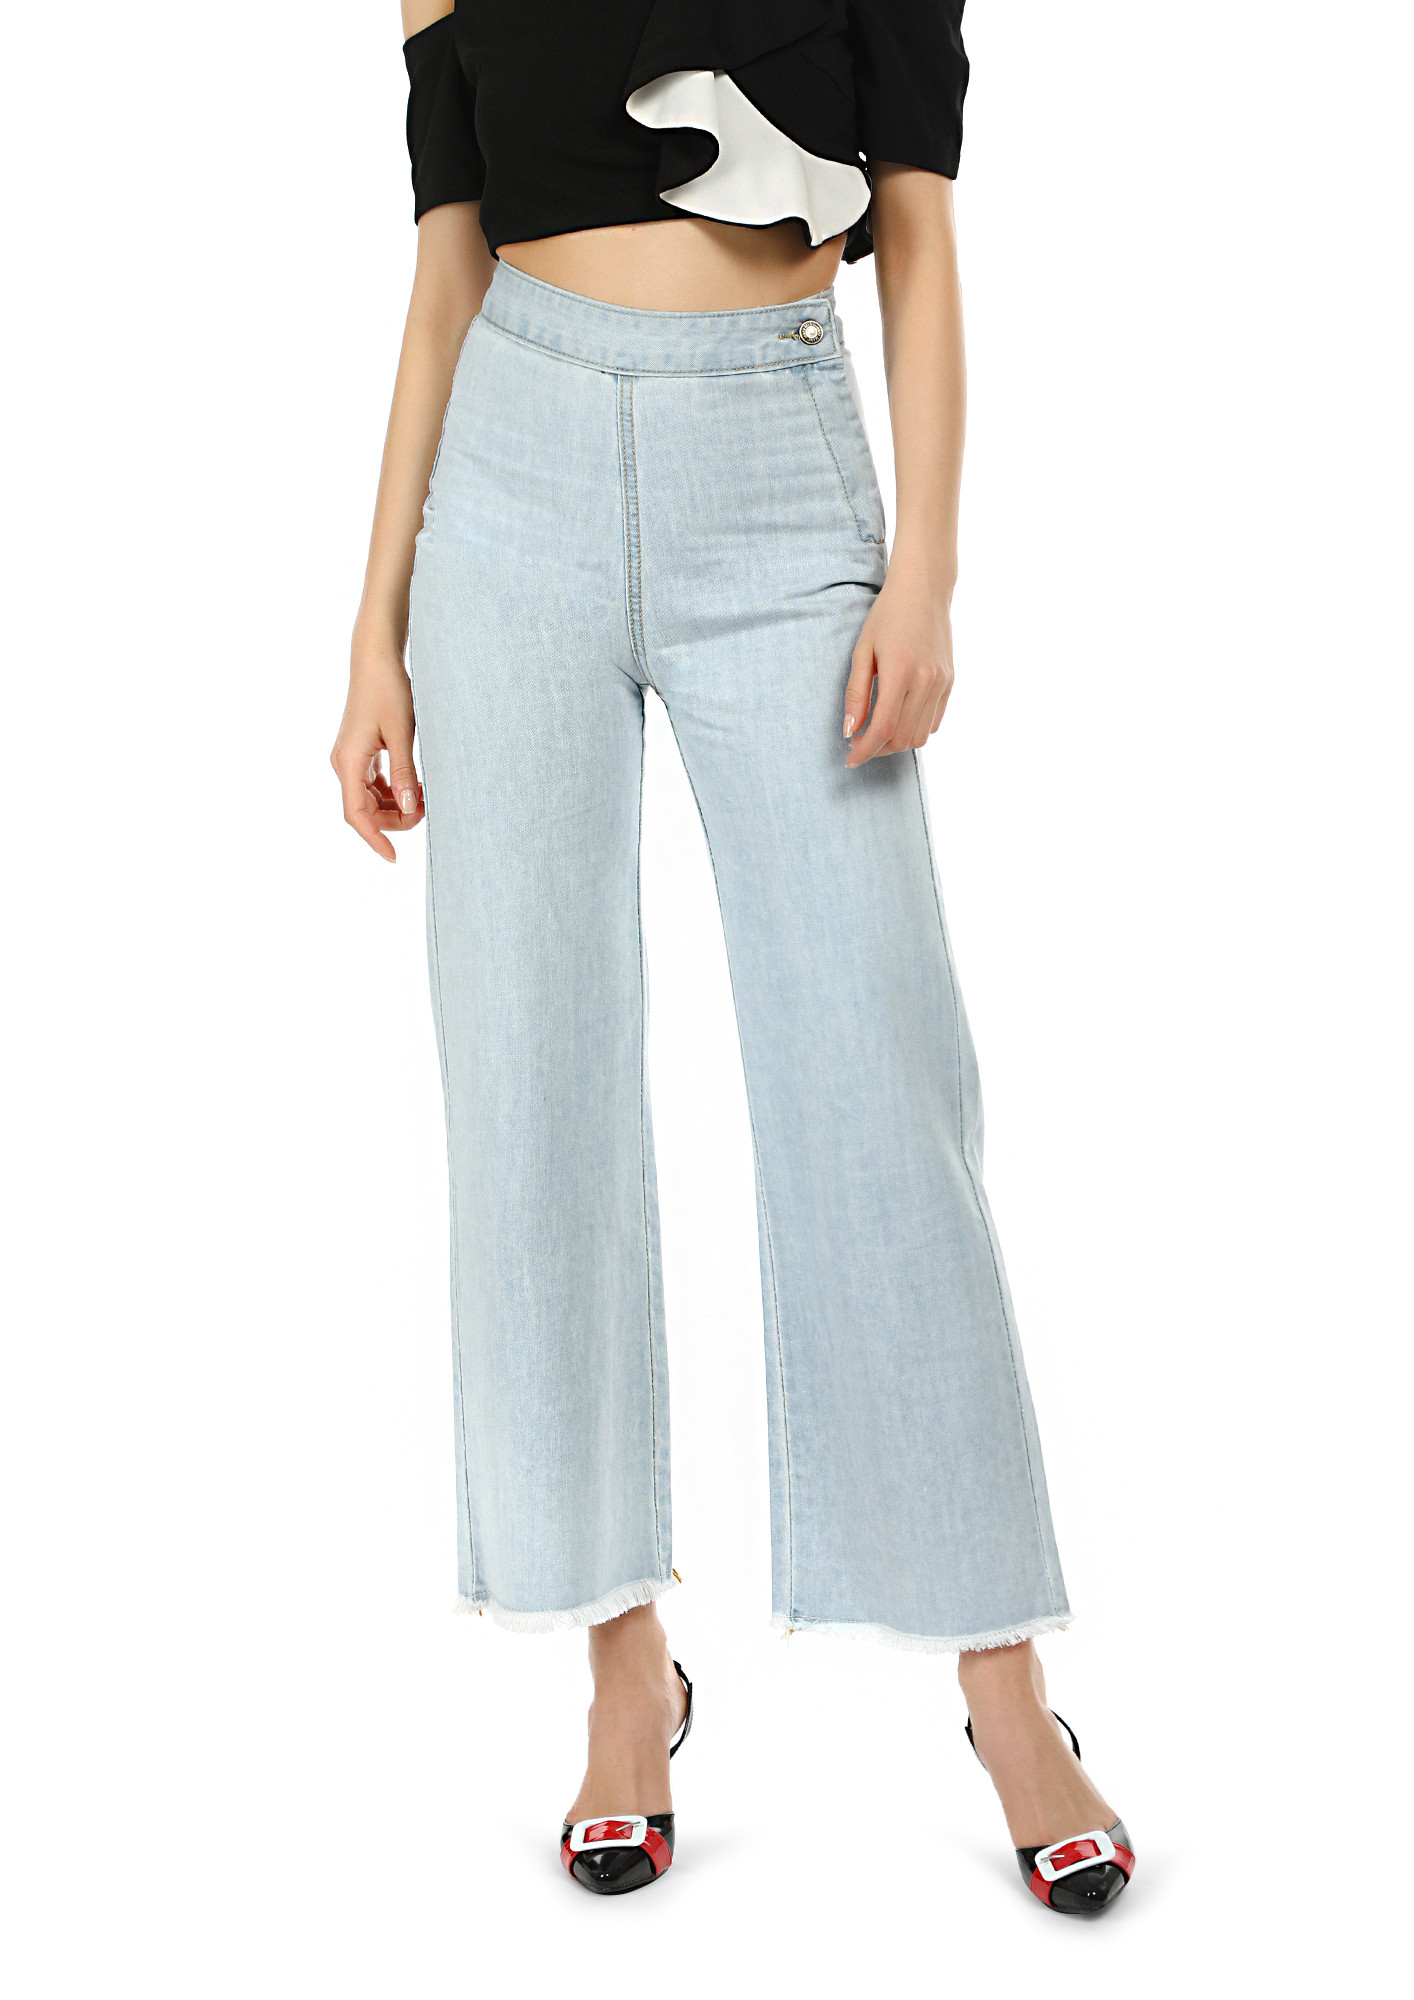 HIGH WAISTED LIGHT BLUE FLARED JEANS